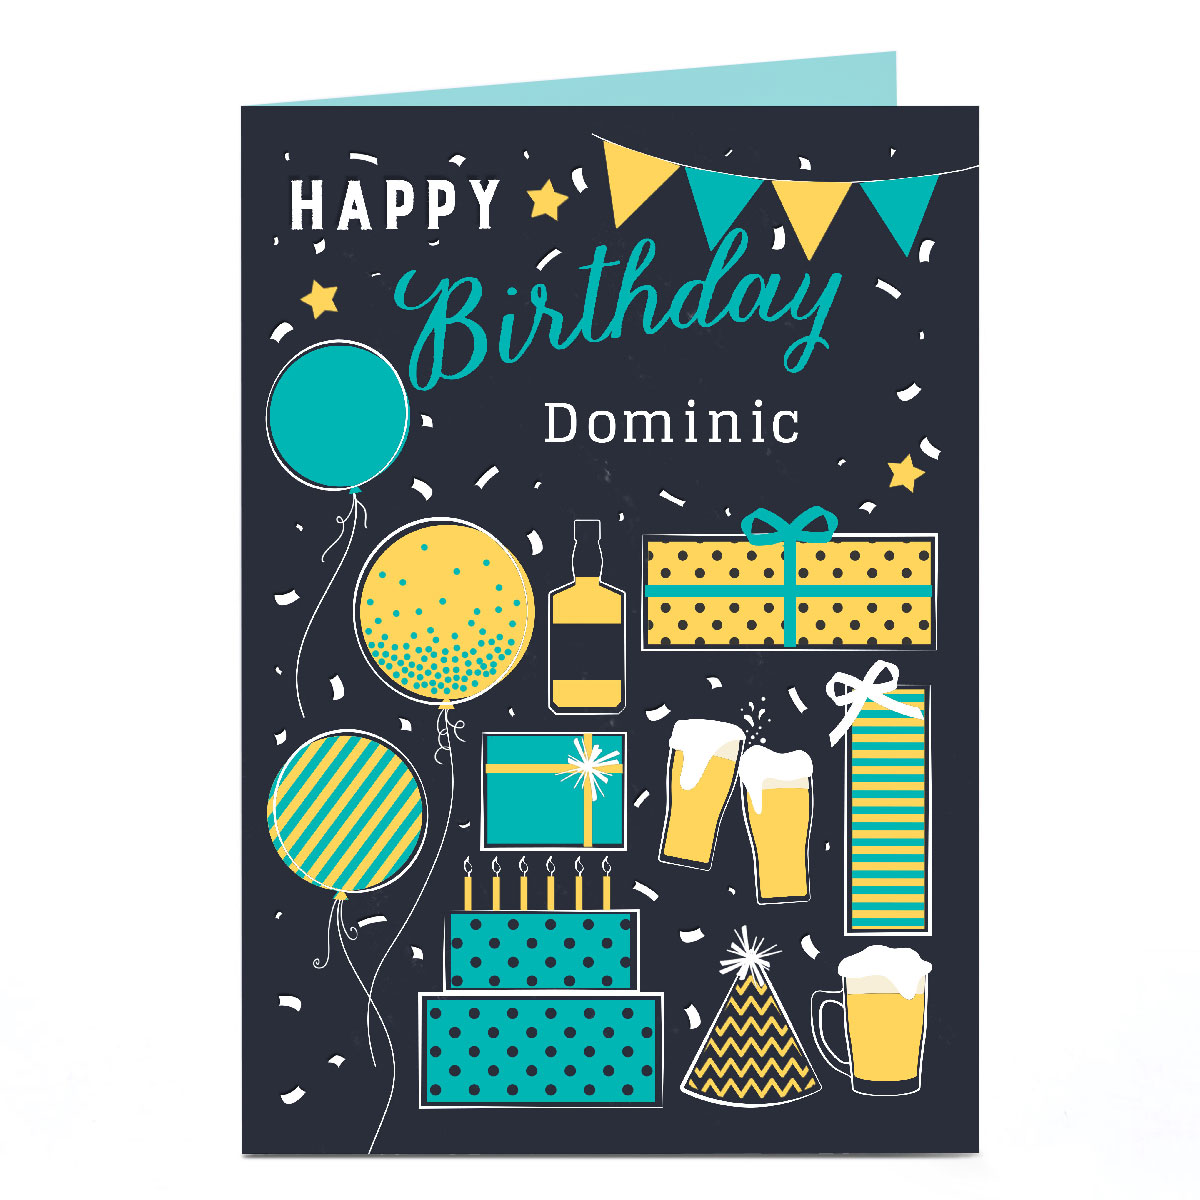 Personalised Birthday Card - Booze, Presents and Balloons